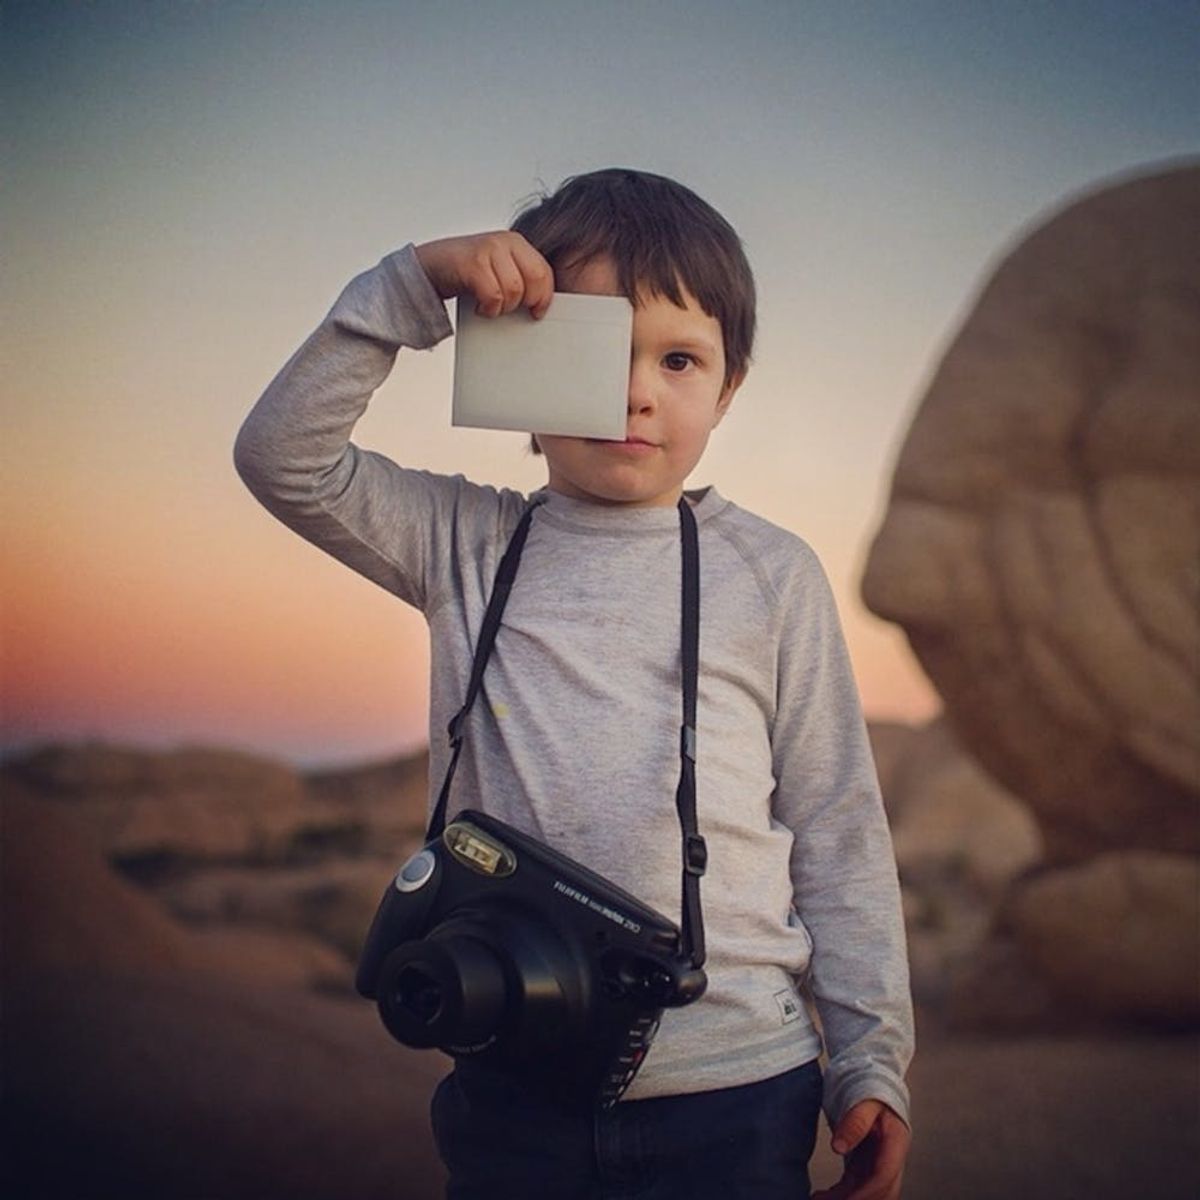 Meet the 4-Year-Old Who Is a Better Photographer Than You